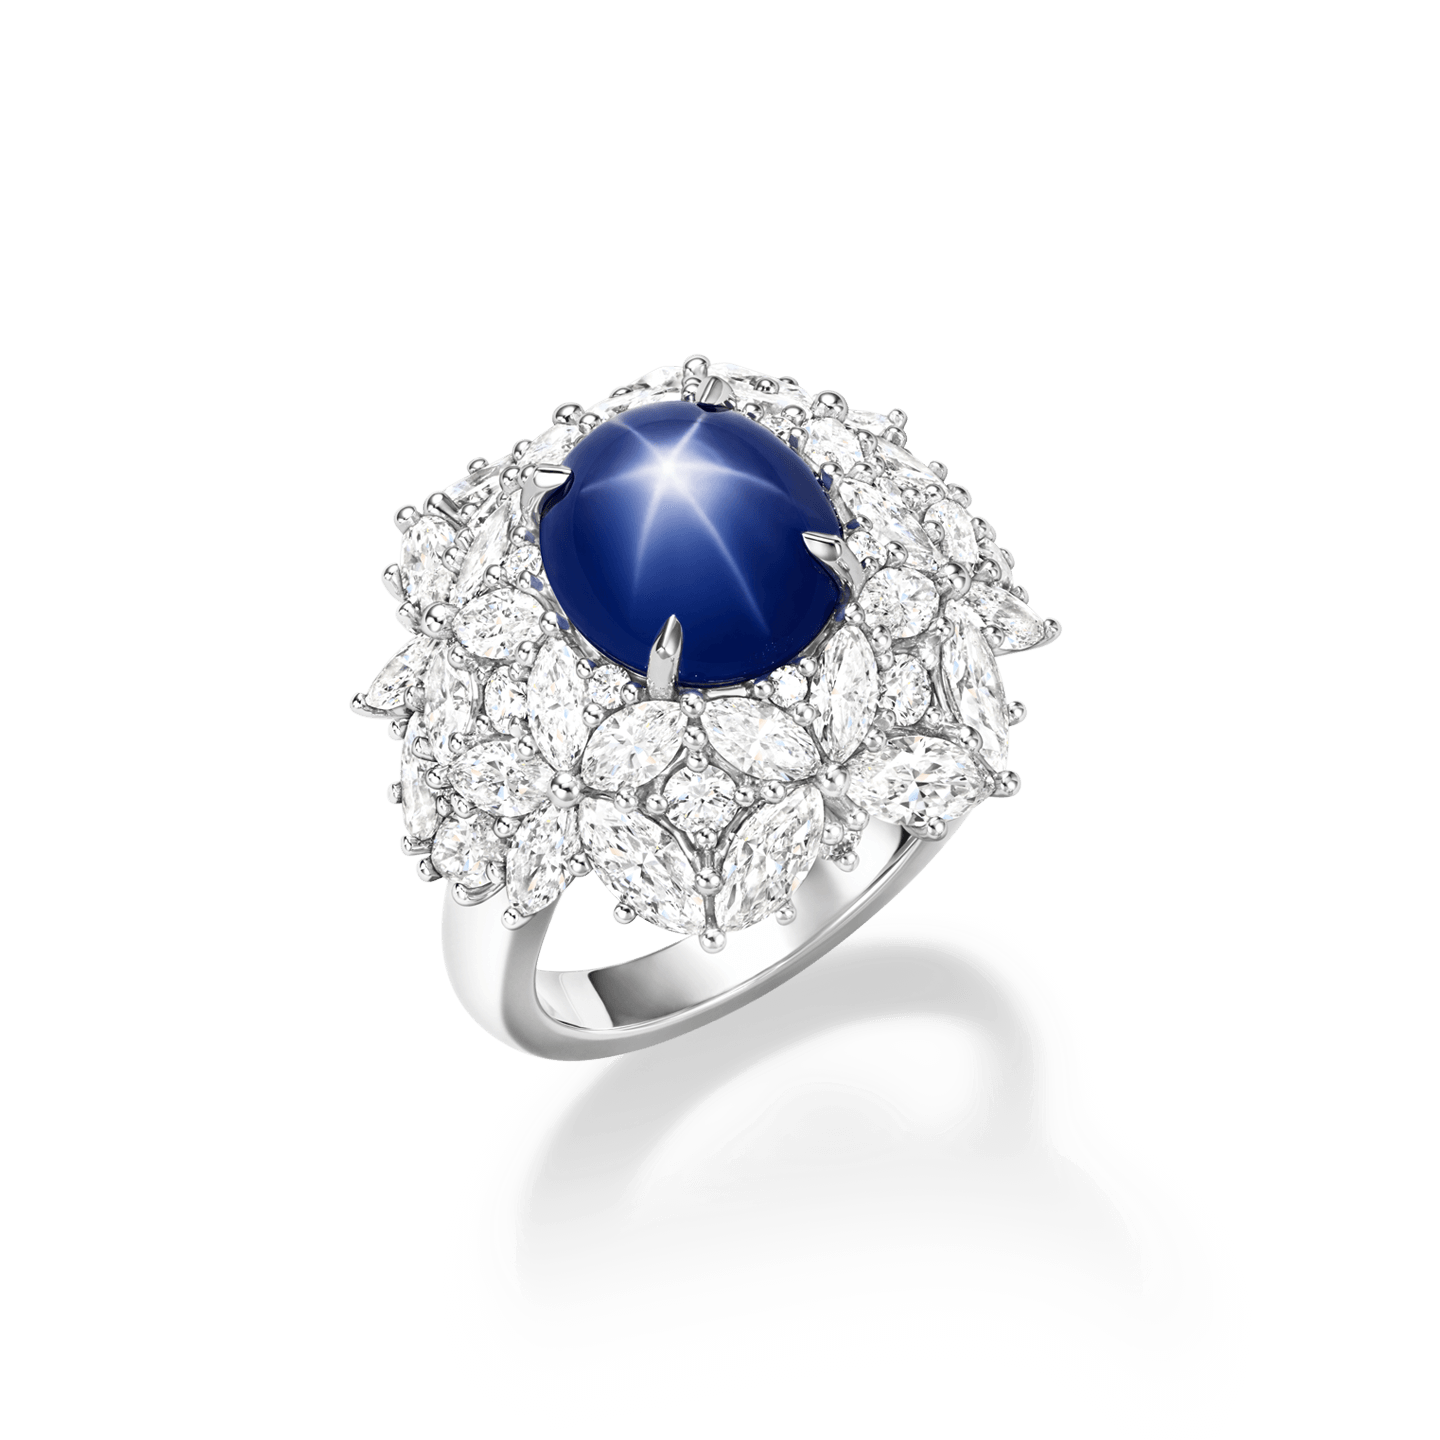 Star Sapphire Ring by Harry Winston